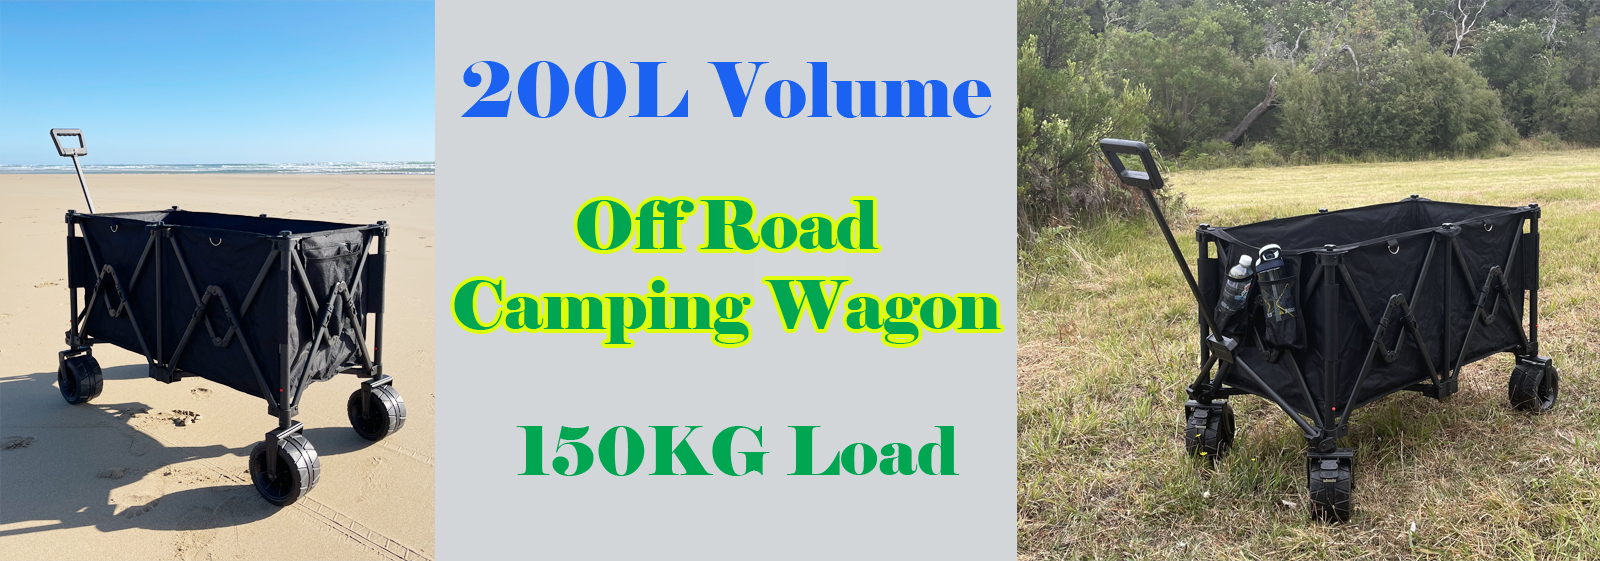 Super Large Off Road Camping Wagon